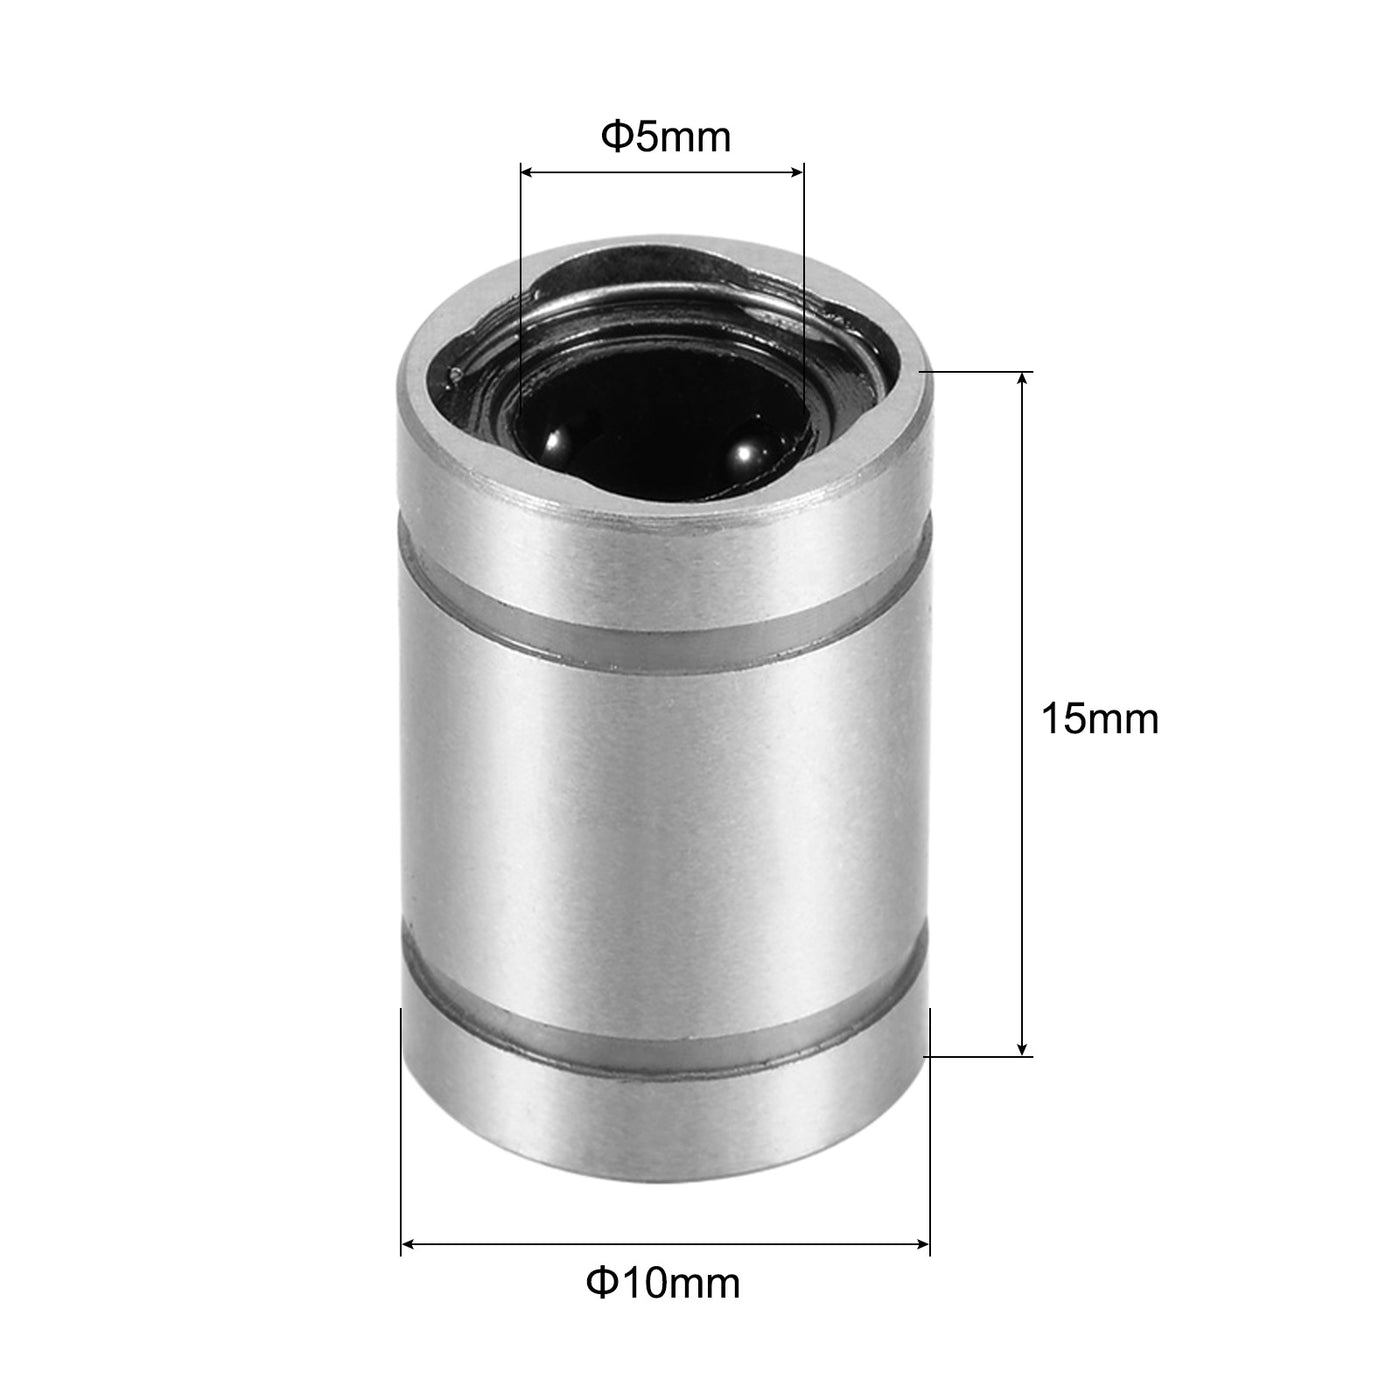 uxcell Uxcell 12pcs LM5UU Linear Ball Bearings, 5mm Bore 10mm OD 15mm Long Linear Bearing for CNC, 3D Printer